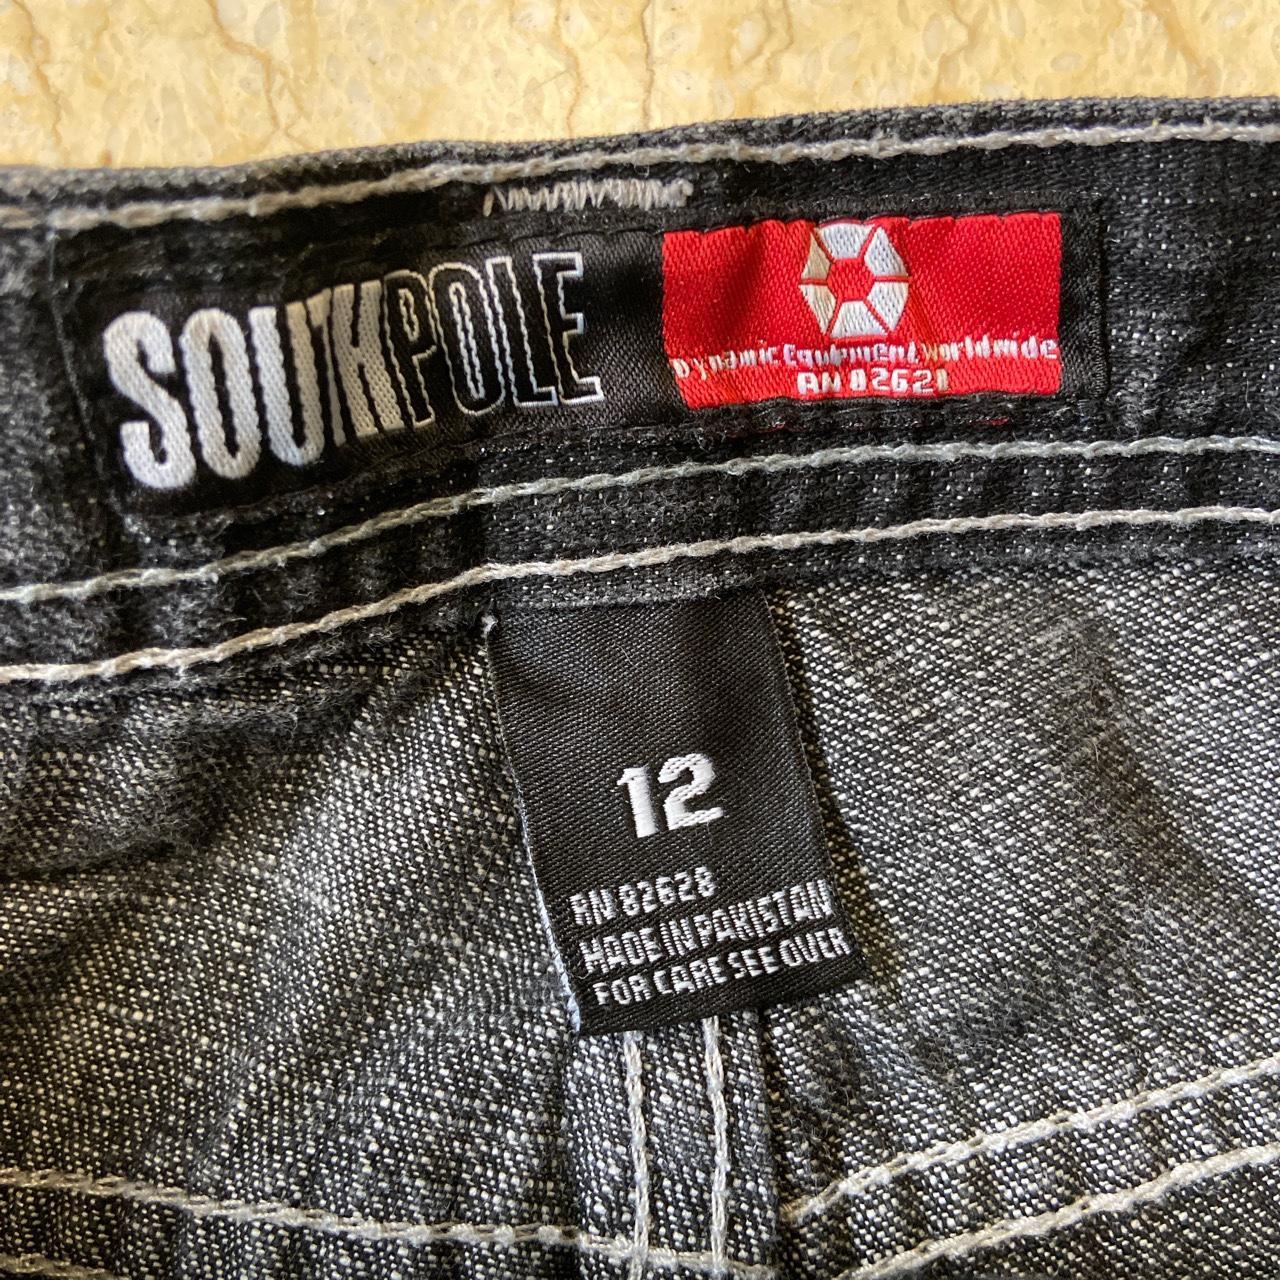 Dope ass southpole black jorts red tabs So mad these... - Depop